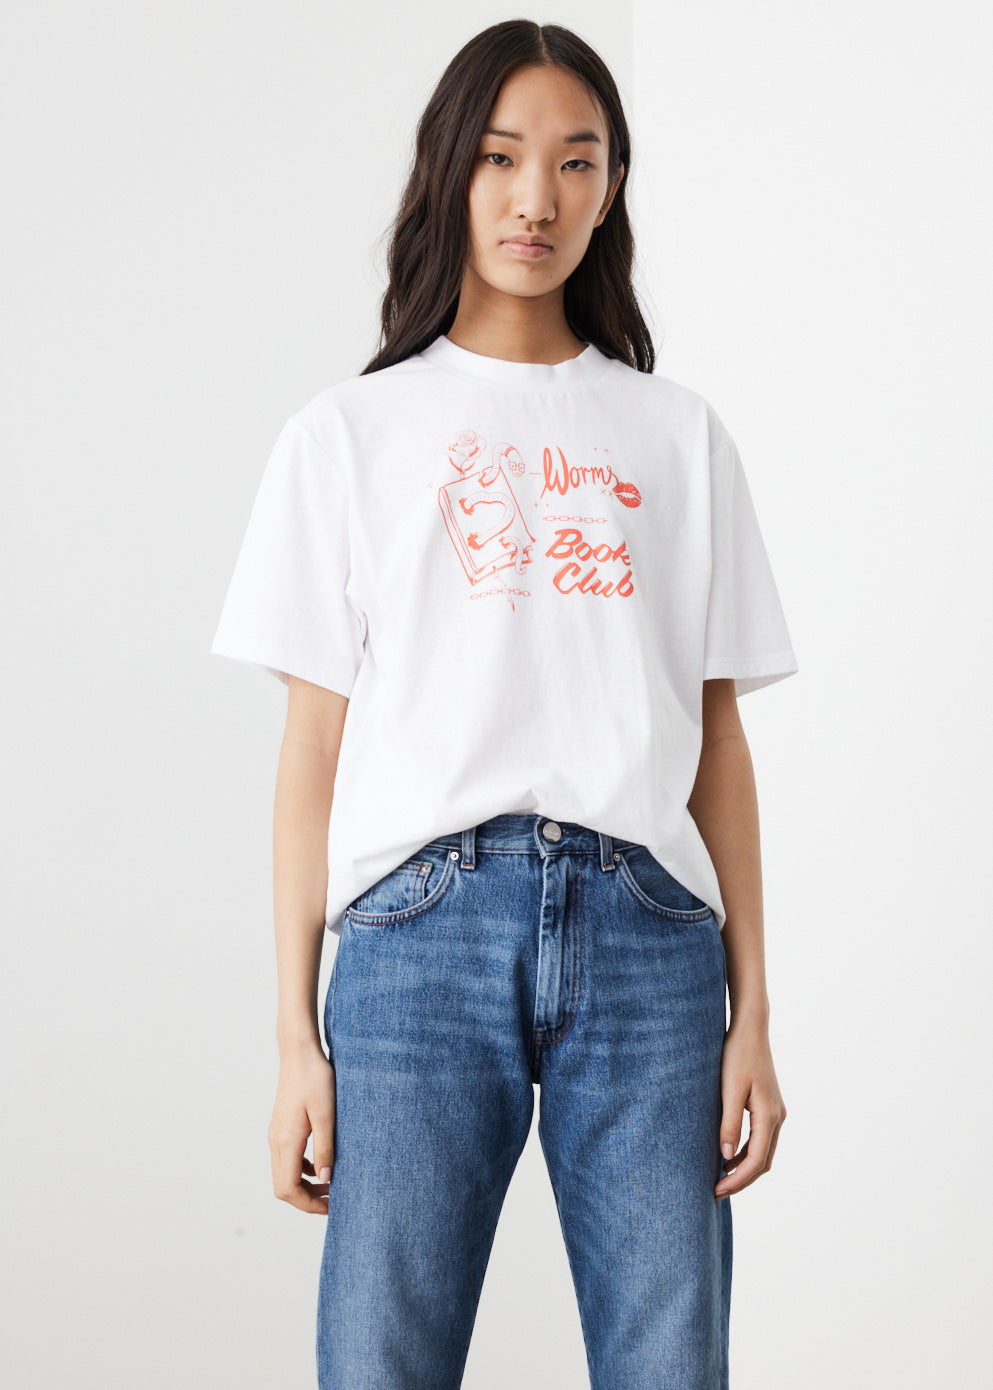 Women's White Worms Kiss T-Shirt by Incu Collection | Incu